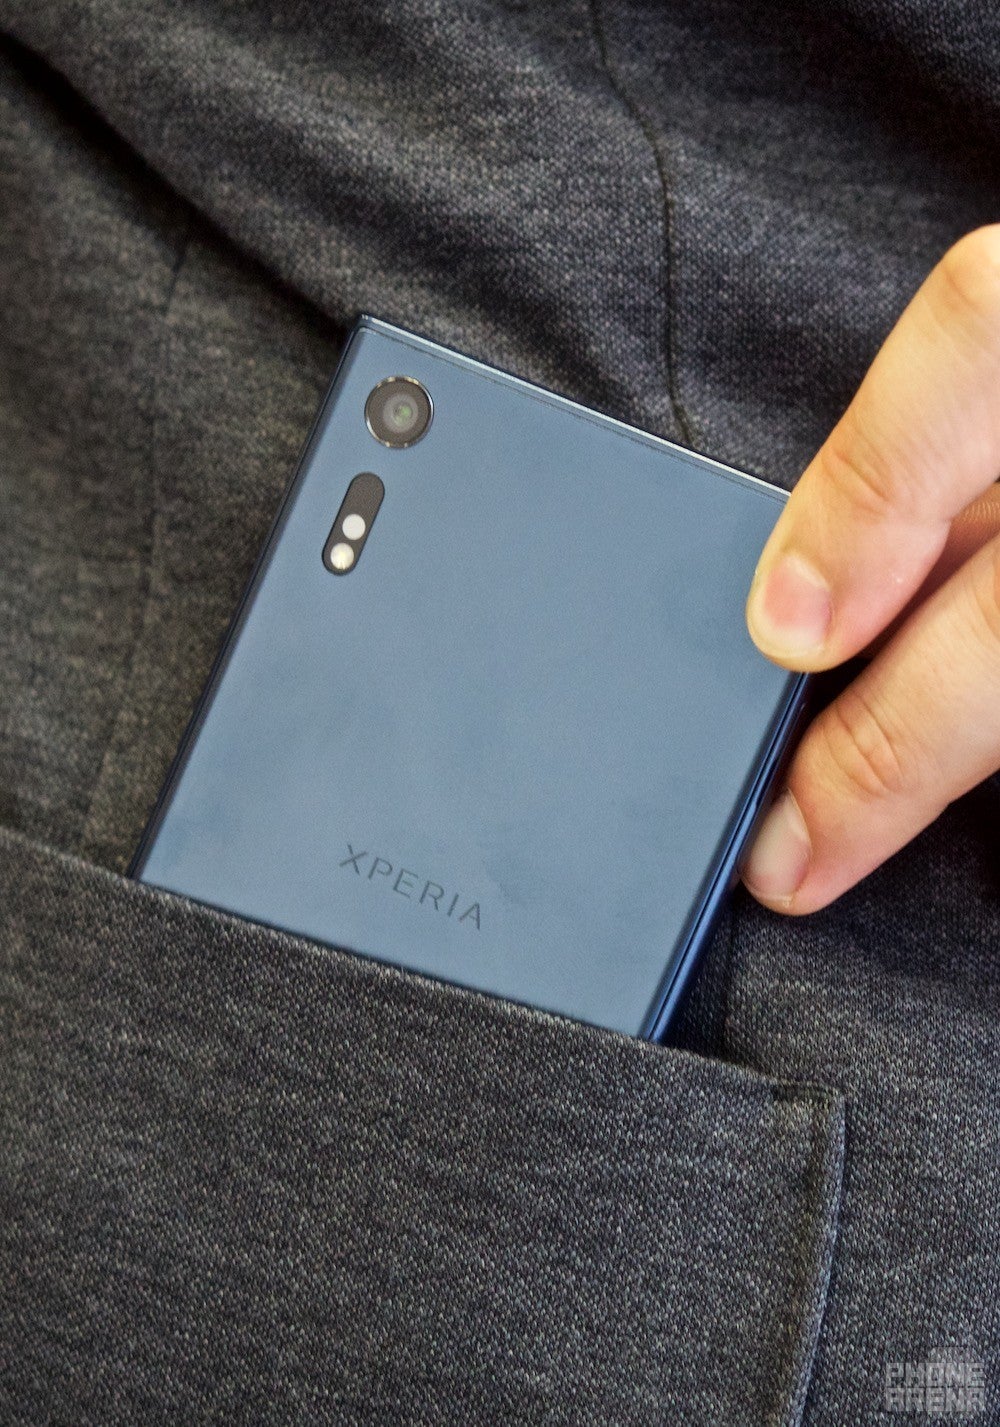 Sony Xperia XZ hands-on: back to awesomeness